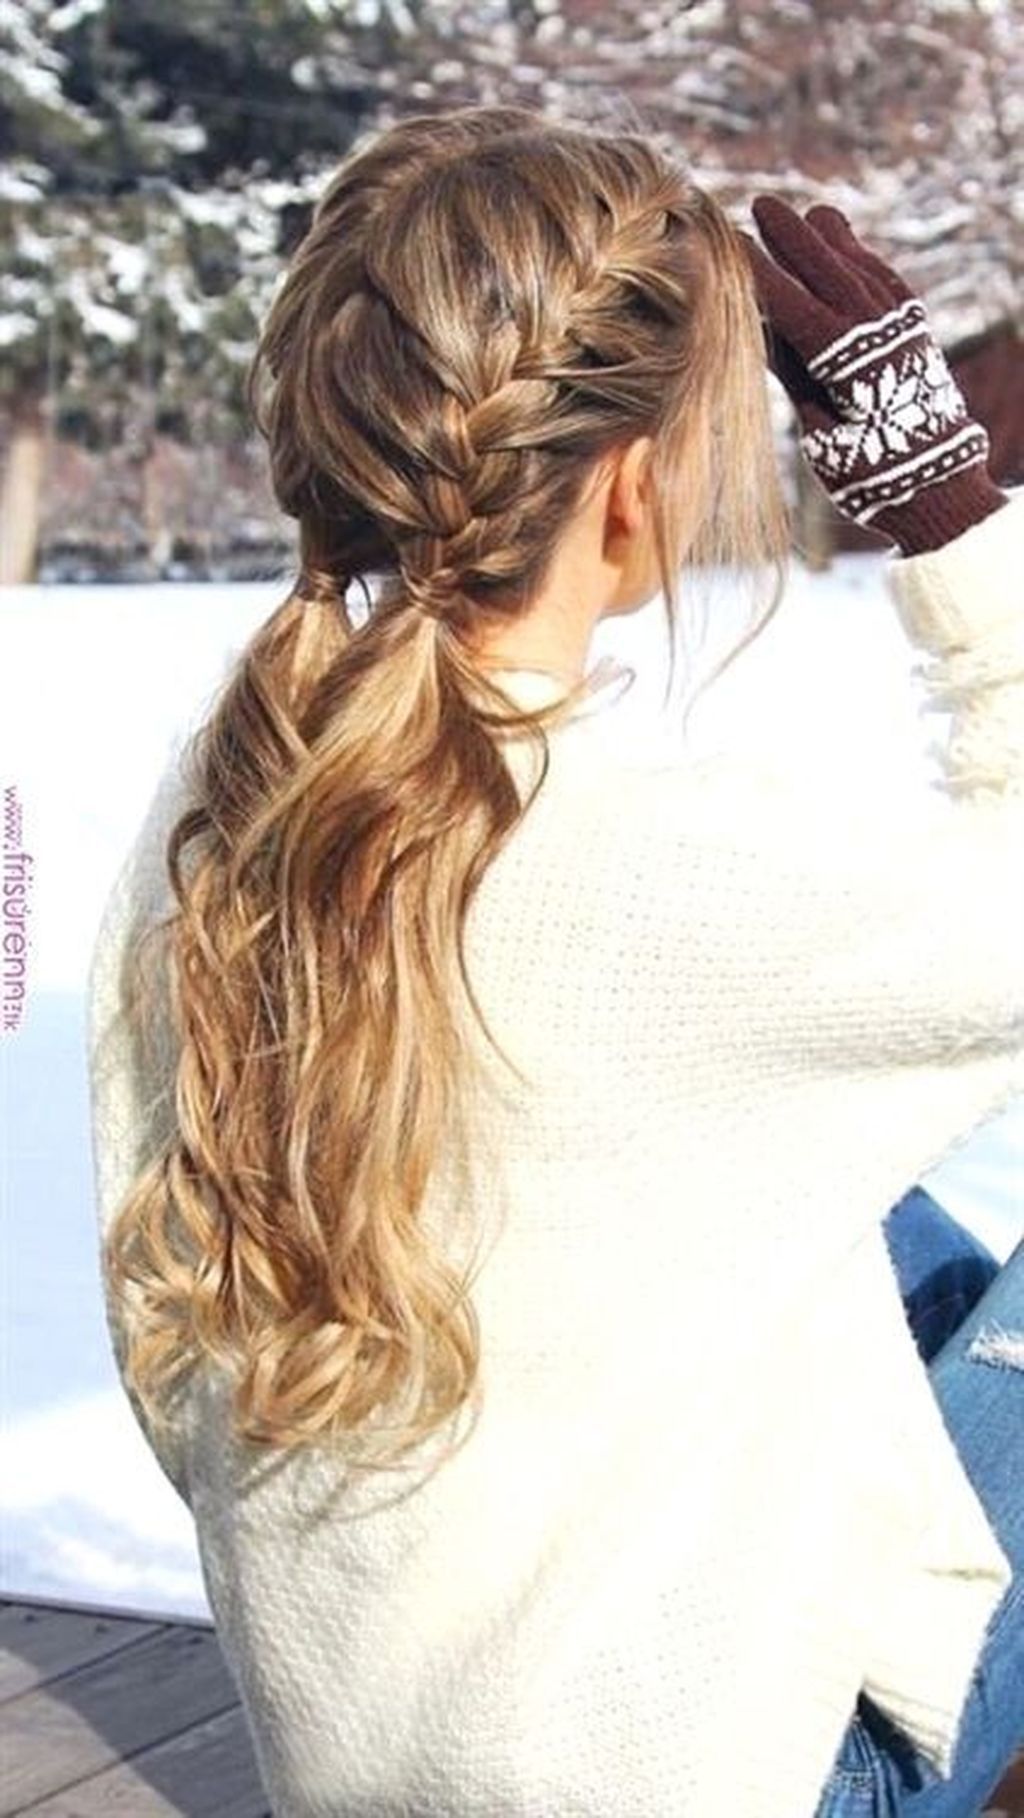 40+ Wonderful Long Hairstyles Ideas For School To Try This Year -   9 hairstyles Trenzas casual ideas